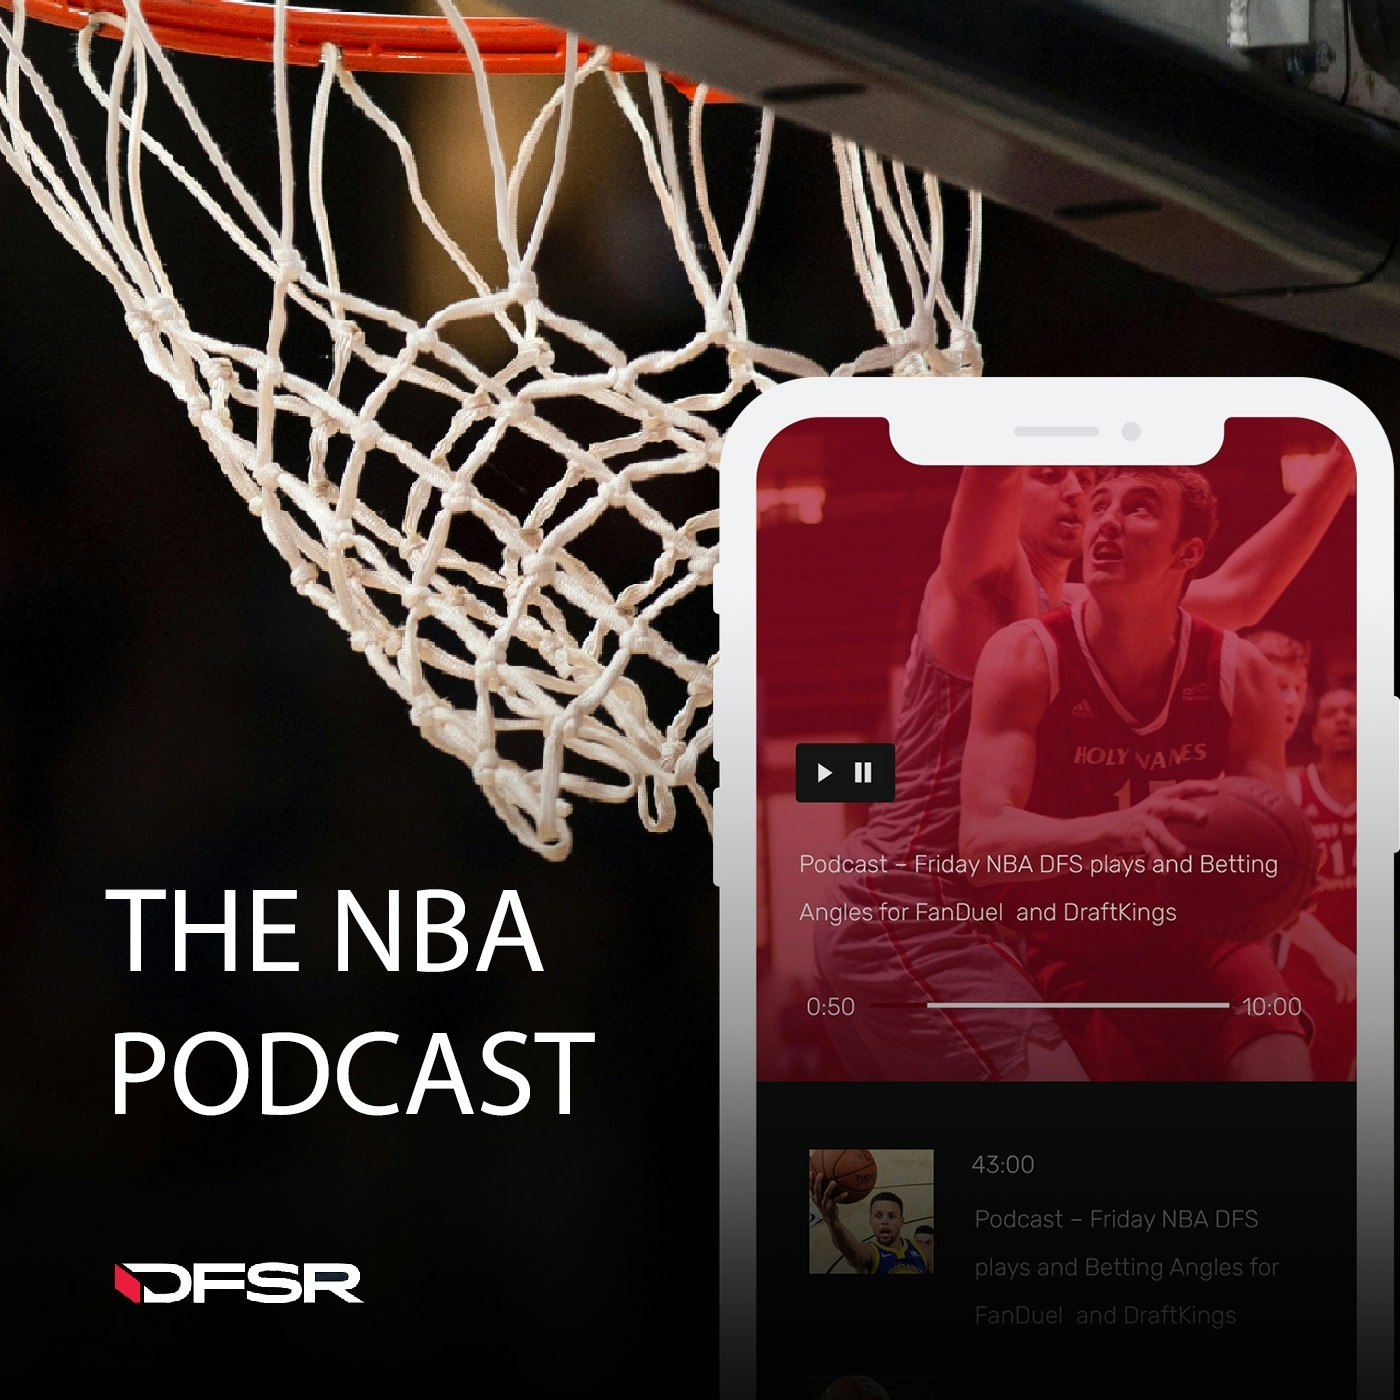 DFS NBA Podcast for Friday 11/2/18 - FanDuel and DraftKings